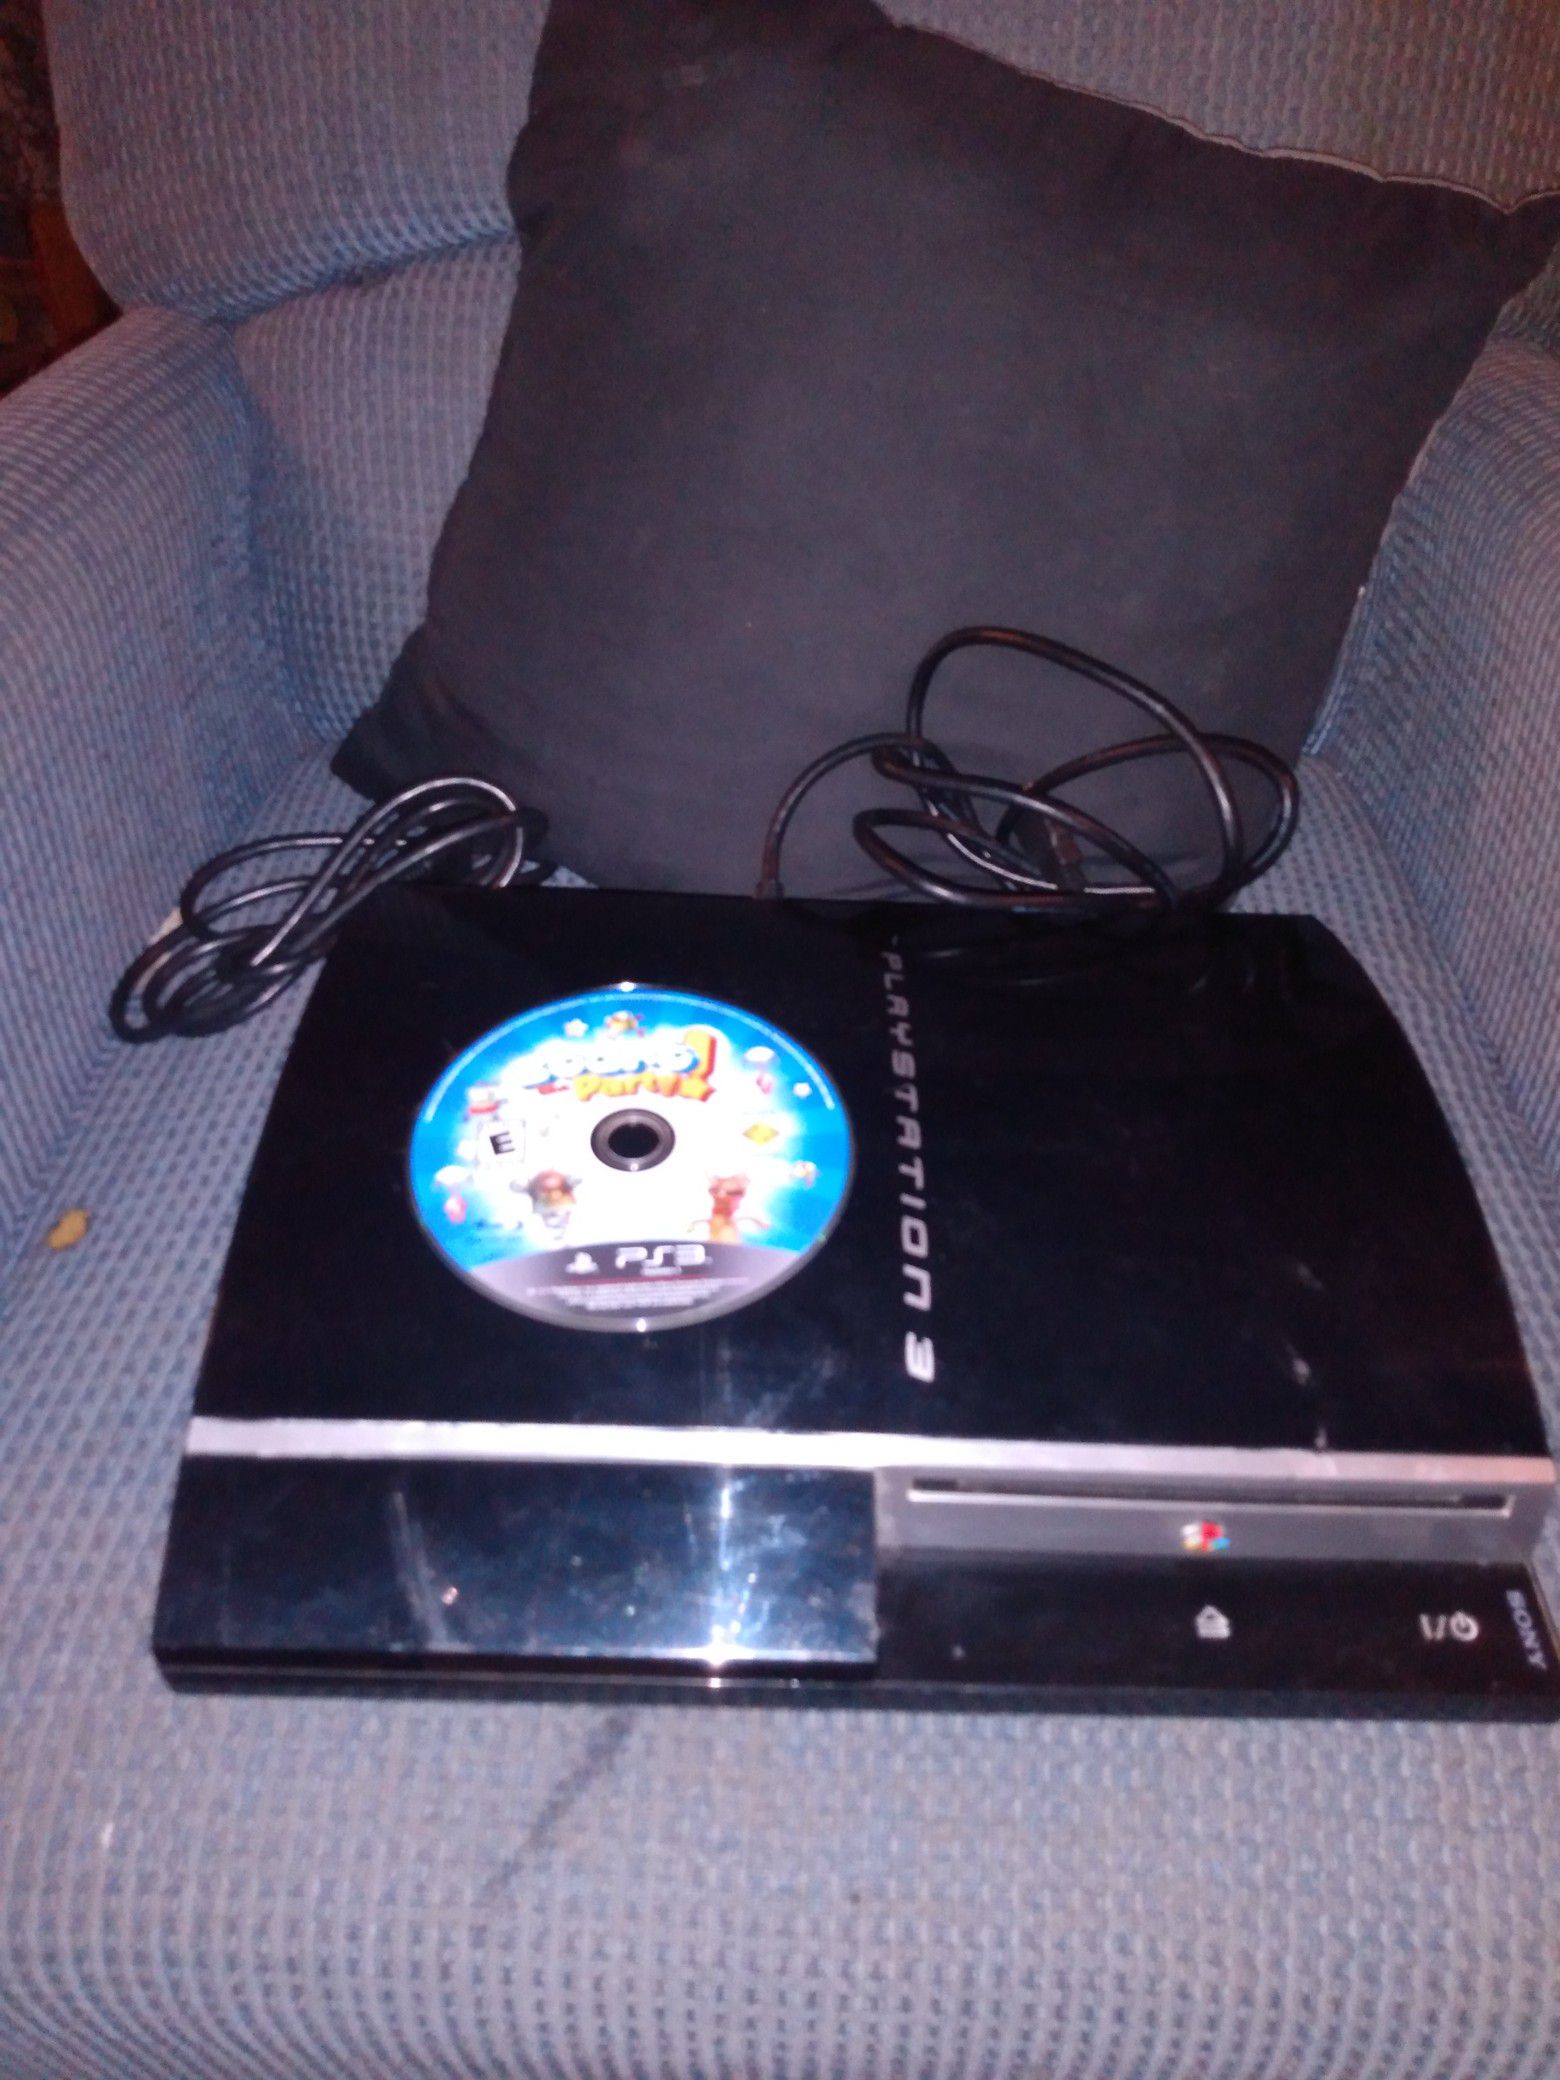 Look another PlayStation 3 no controller comes with the games that party start party